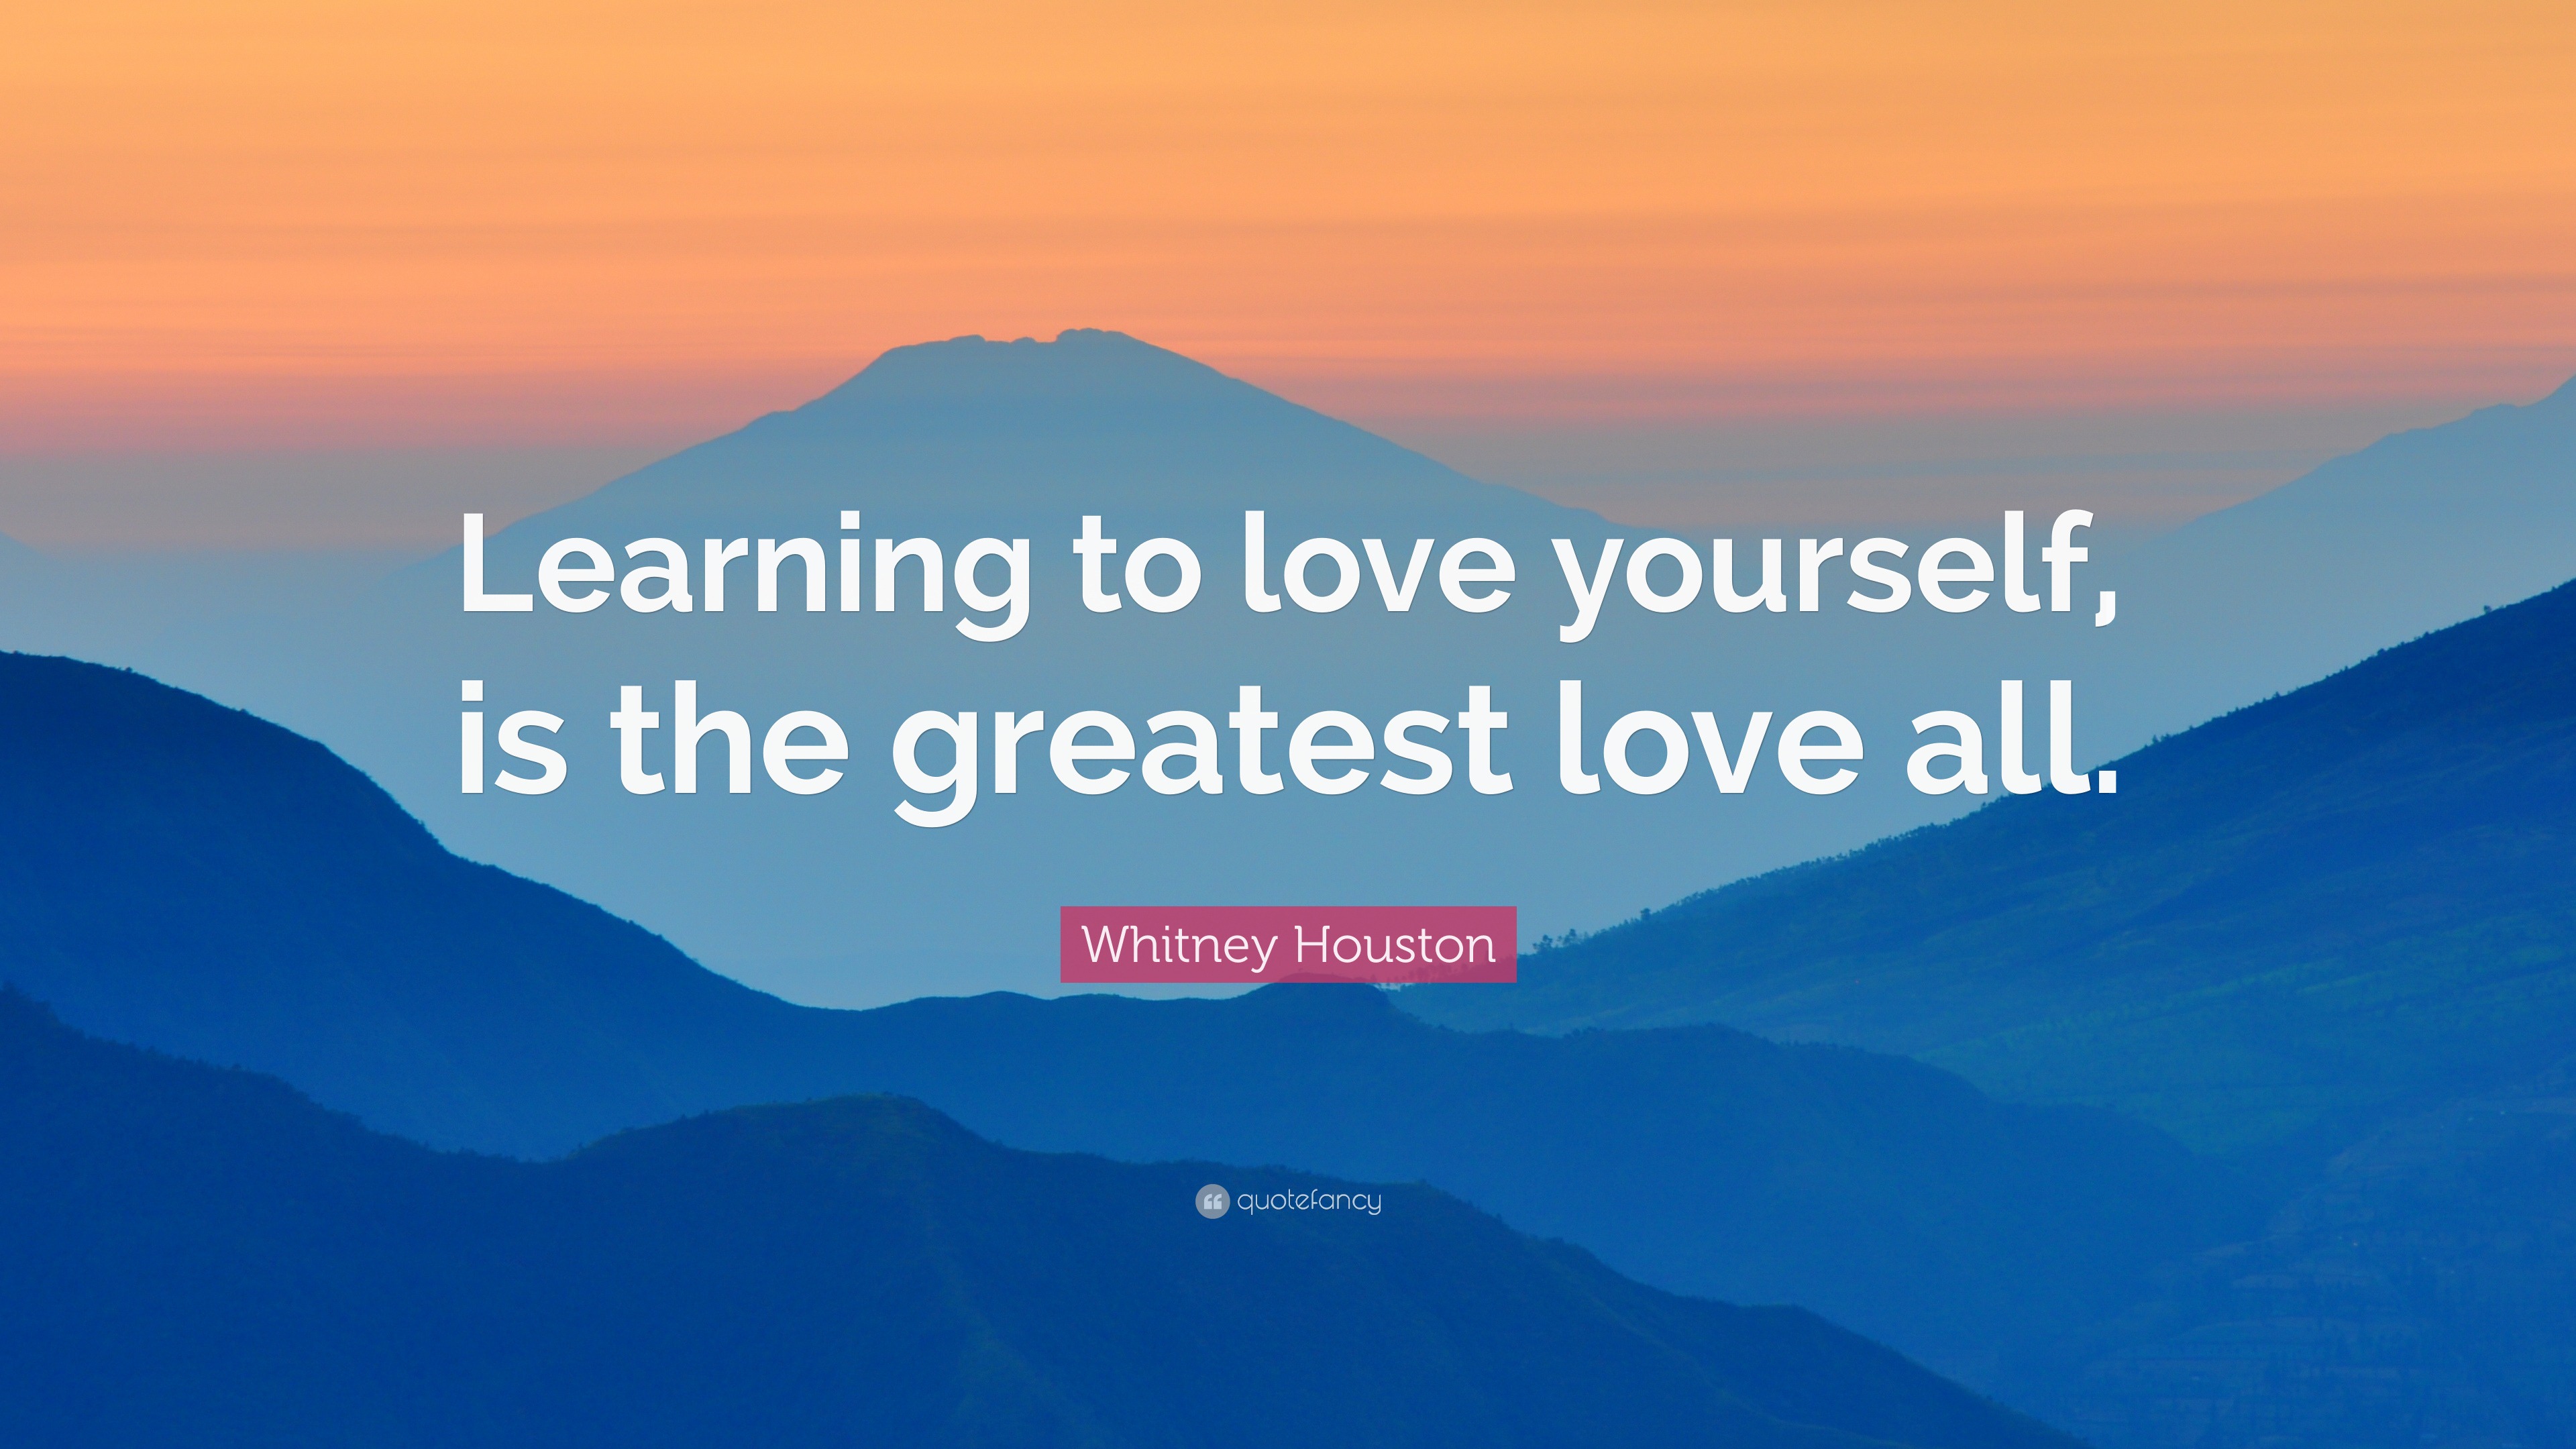 Whitney Houston Quote: “Learning to love yourself, is the greatest love